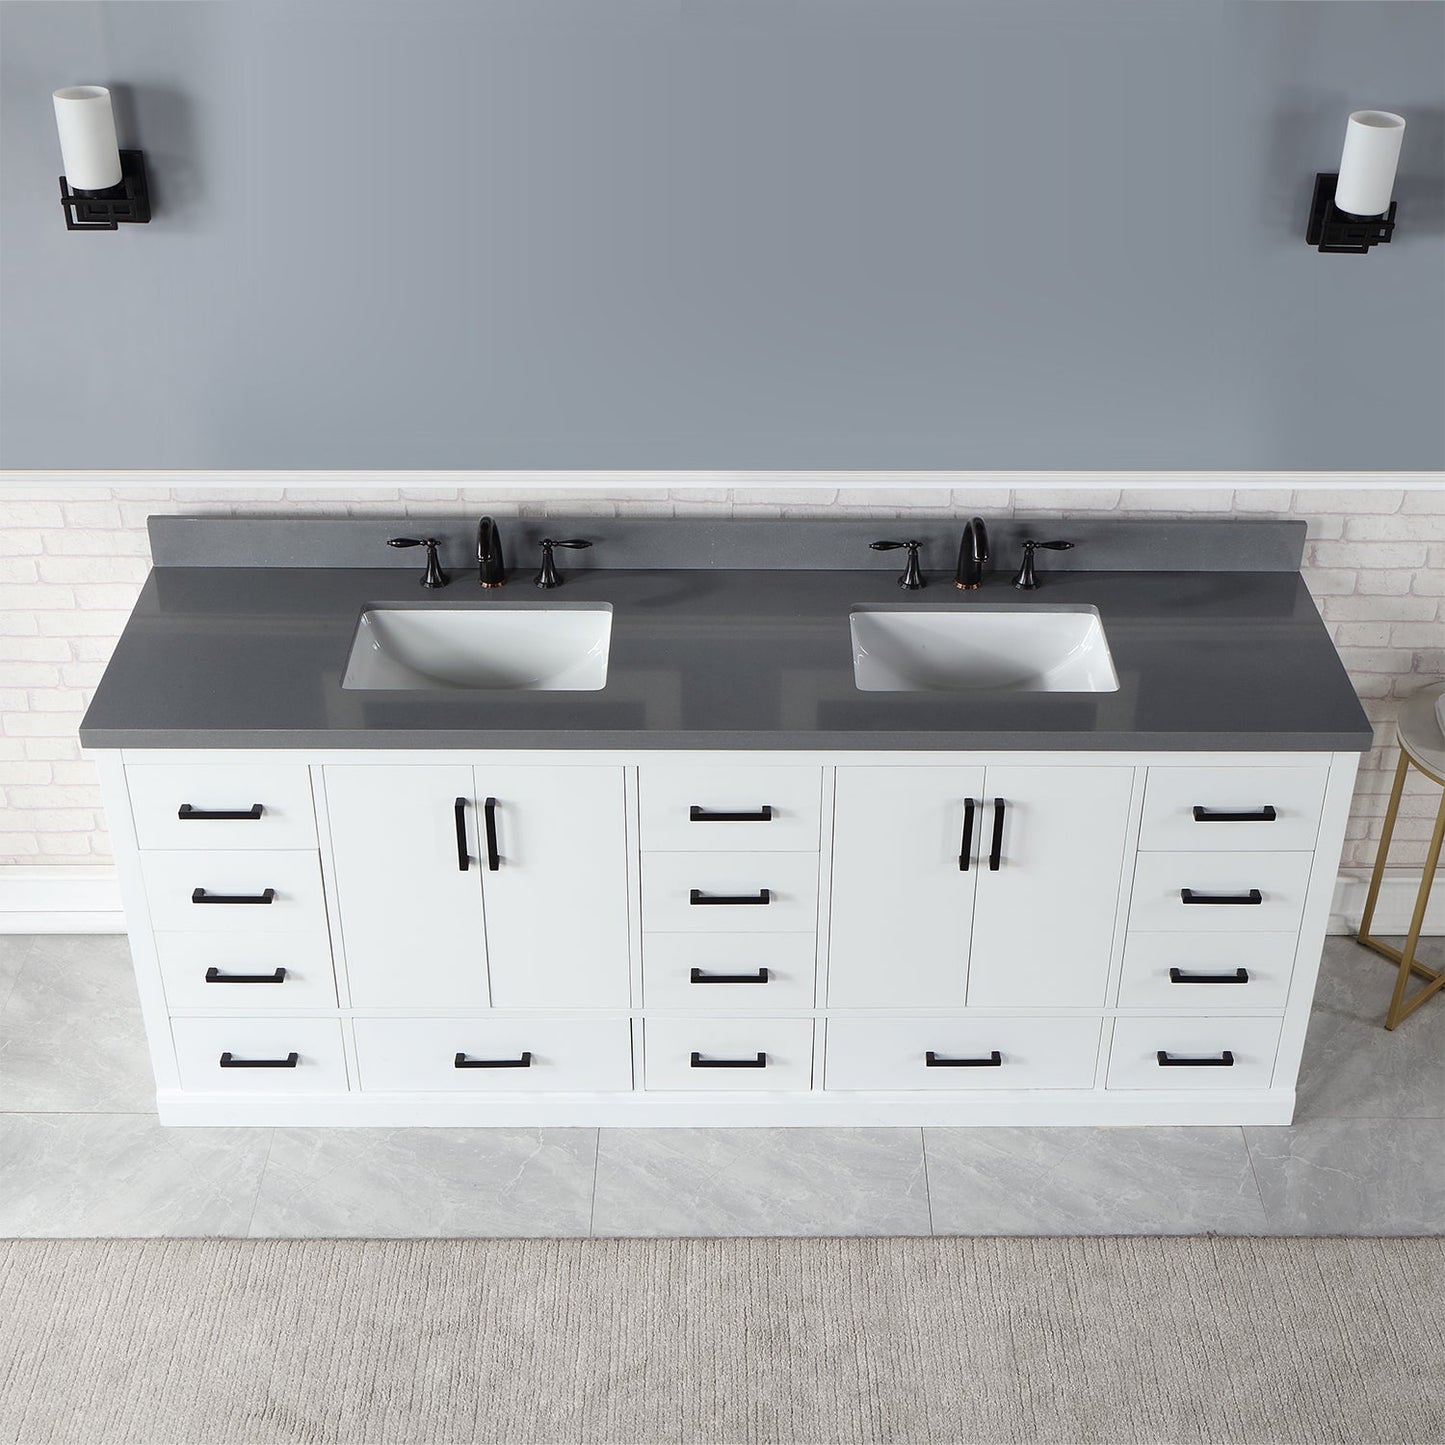 Monna 84" Double Bathroom Vanity Set in White with Concrete Grey Composite Stone Countertop without Mirror